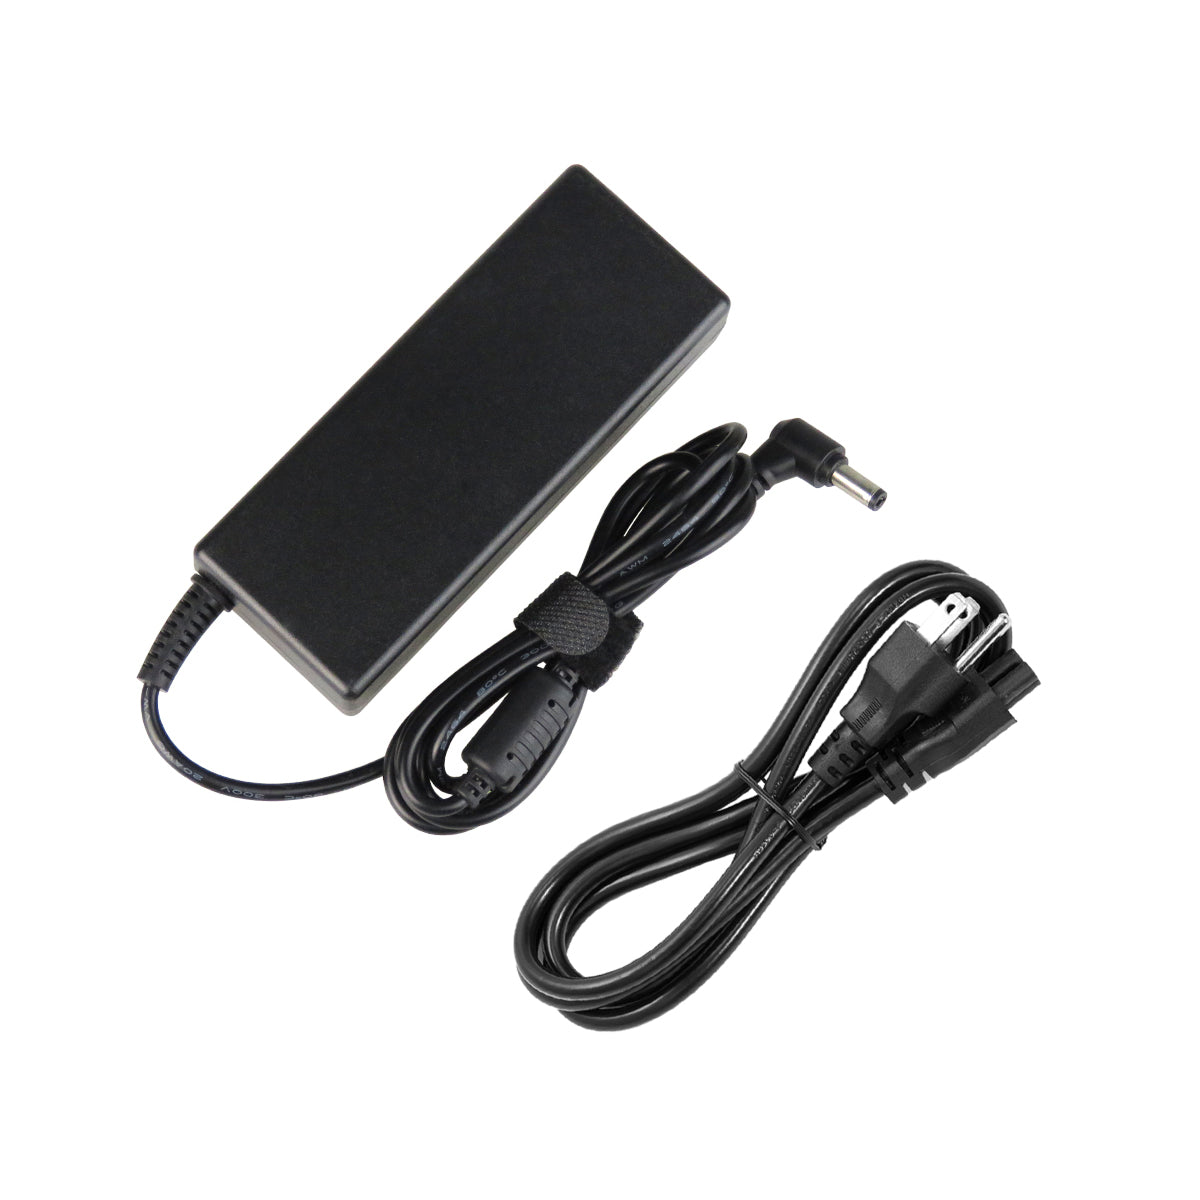 AC Adapter Charger for ASUS A8H Notebook.